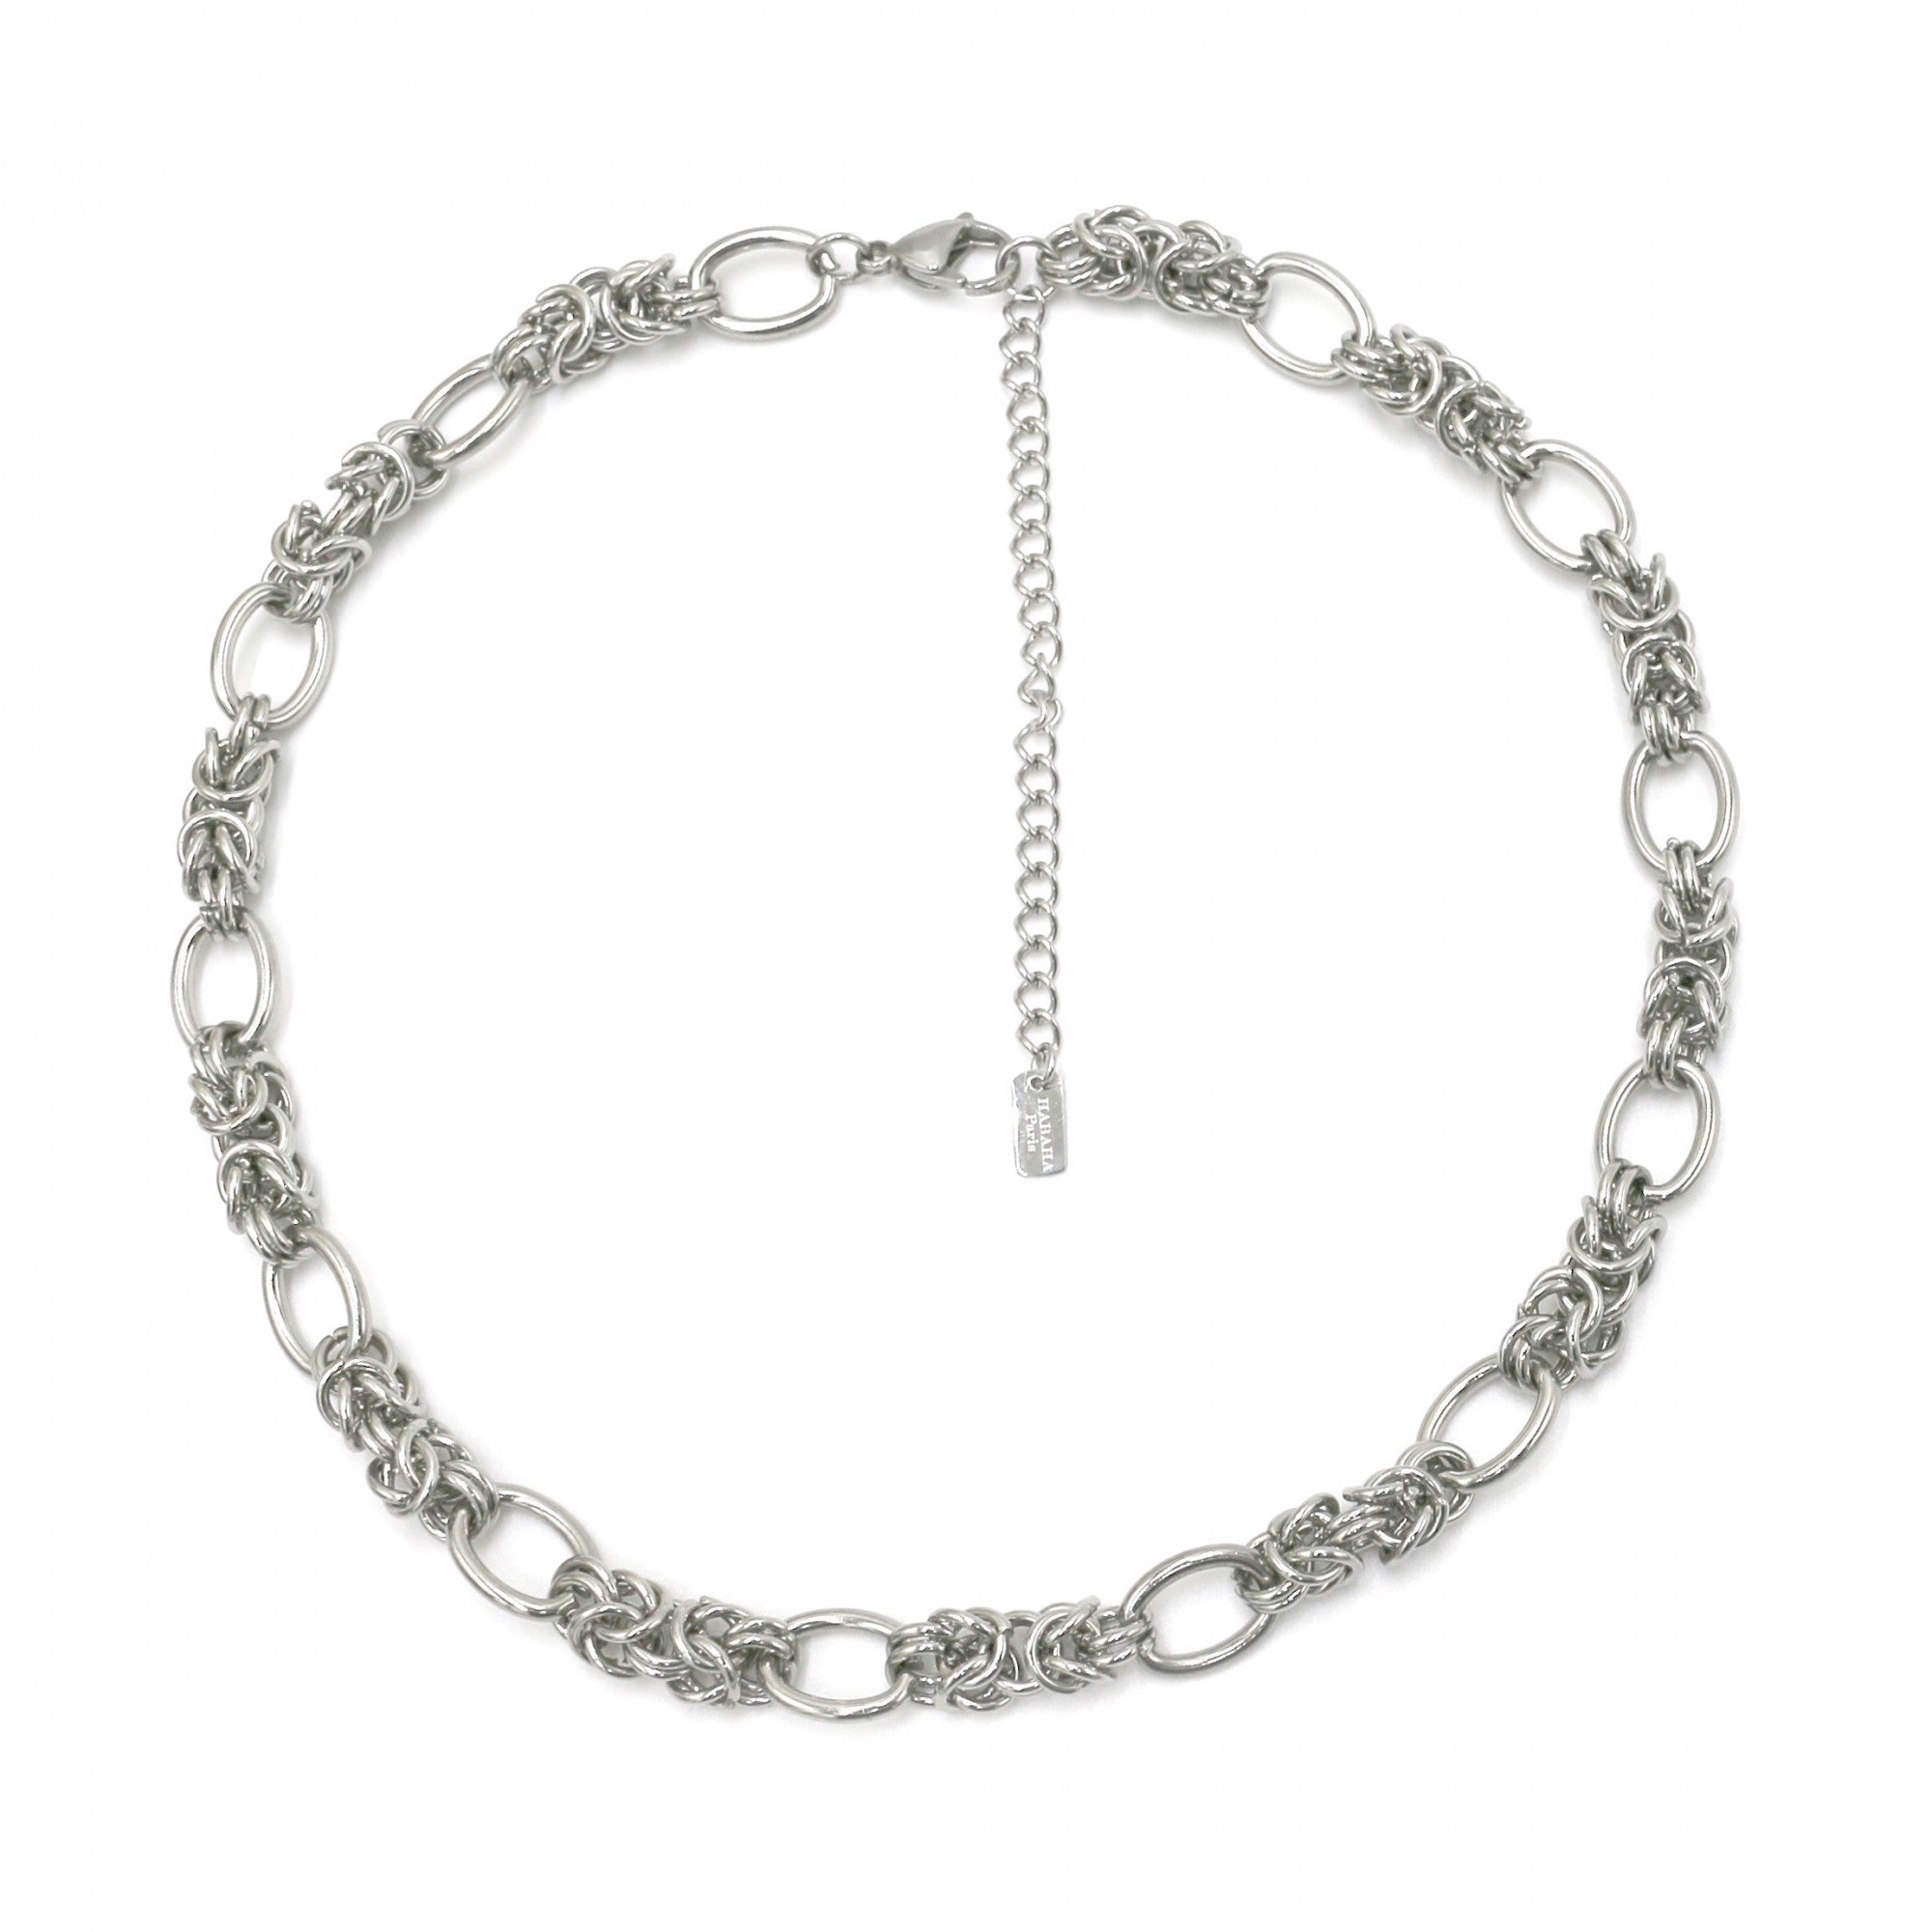 Silver knot oval link necklace